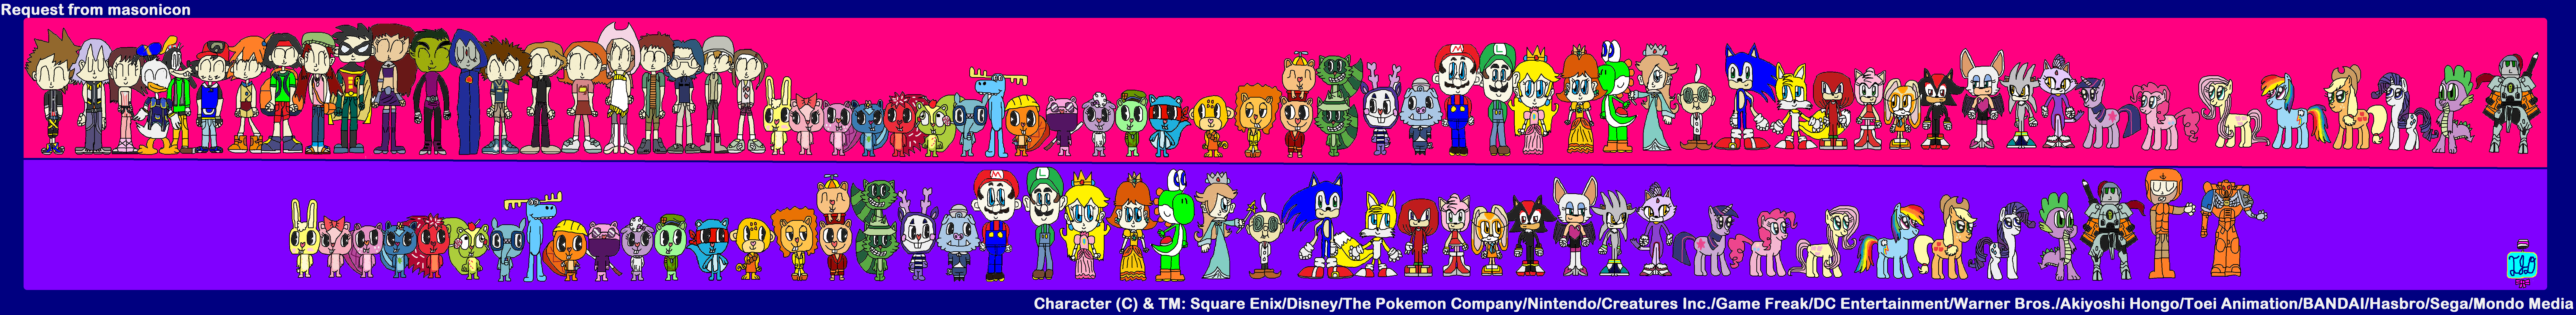 trainload_o__characters__for_masonicon__by_timothyjdarden-dbe7rbj.png